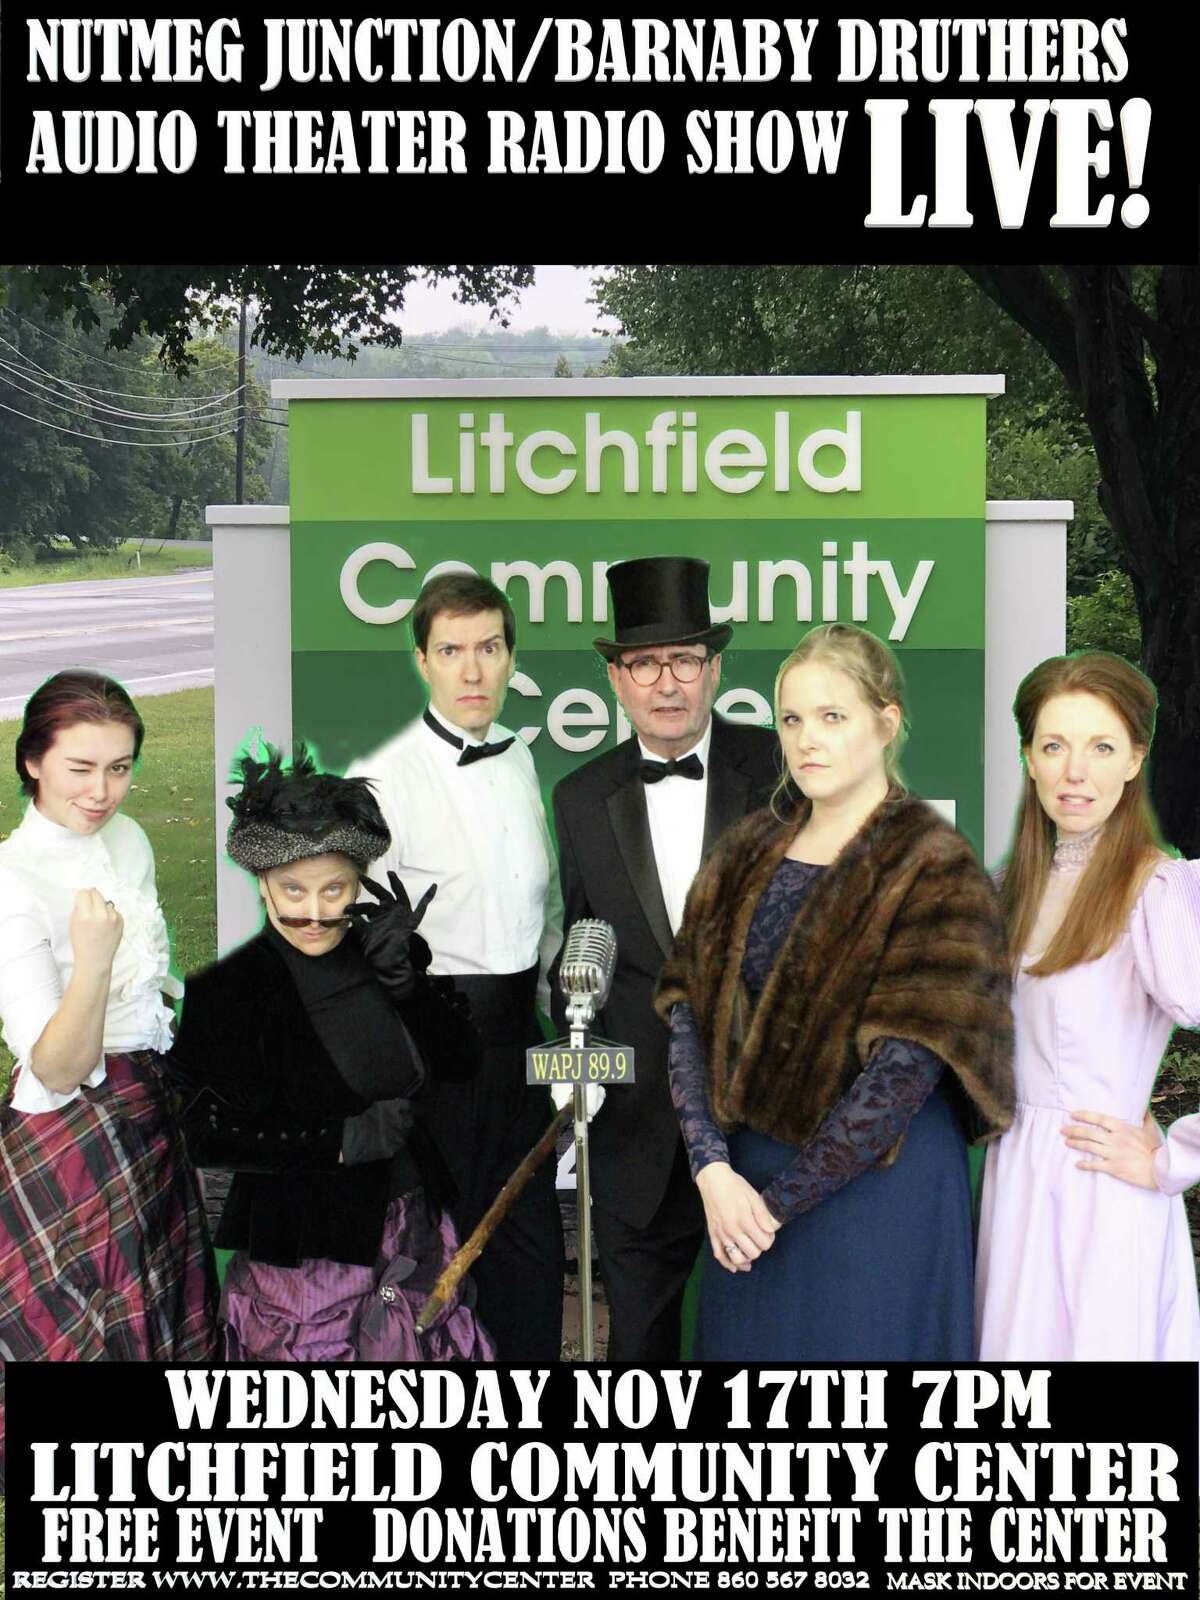 "Barnaby Druthers" is being performed as a live audio theater show at the Litchfield Community Center on Nov. 17.